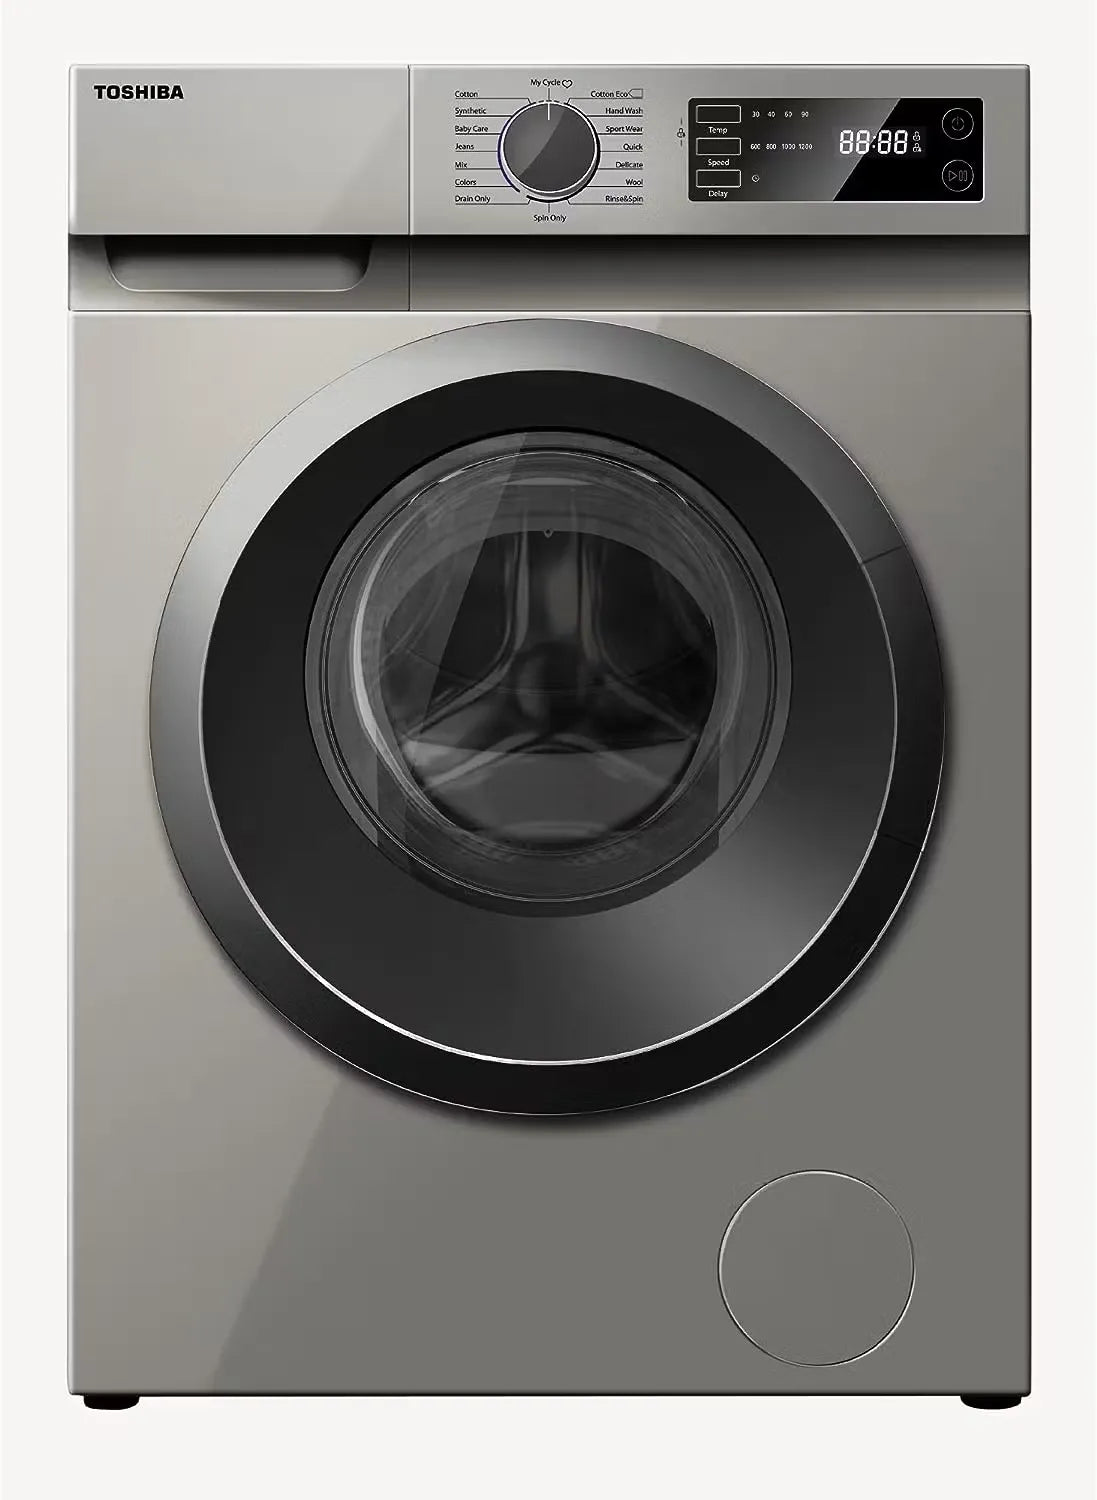 Sleek silver Toshiba 8kg Front Load Washing Machine, featuring a modern design with a large porthole and intuitive control panel.